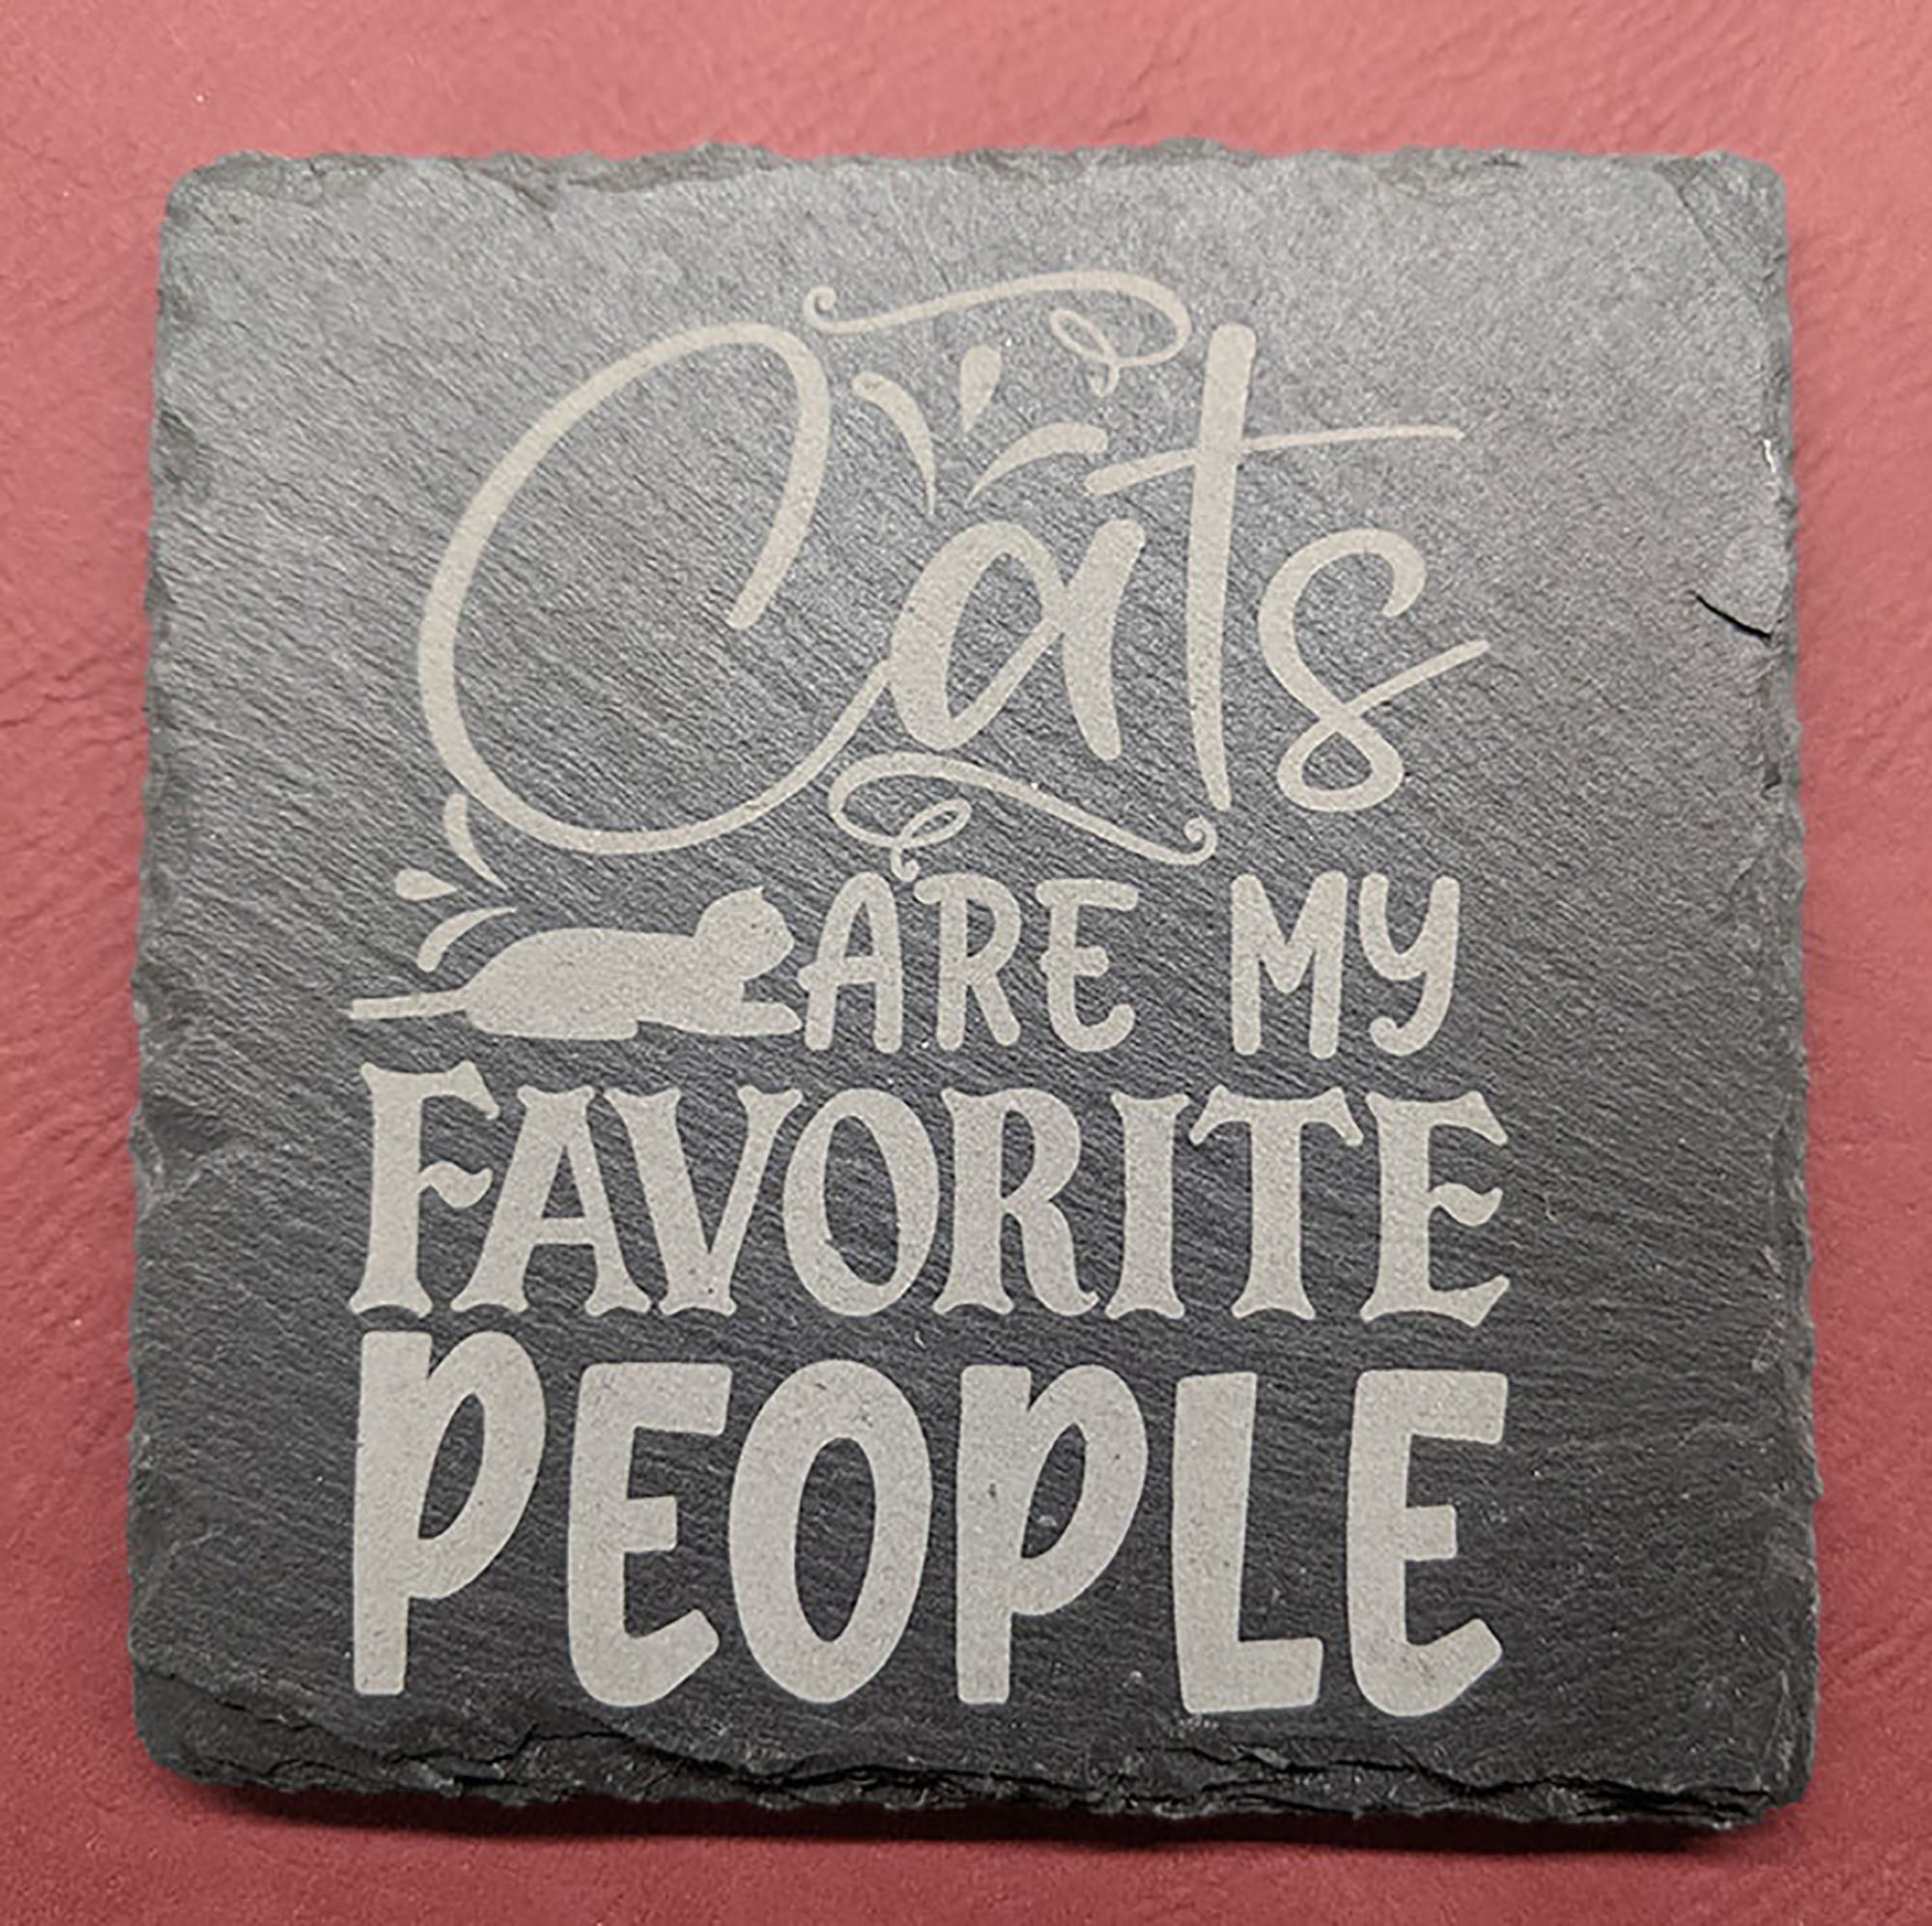 Cats are my Favorite People!